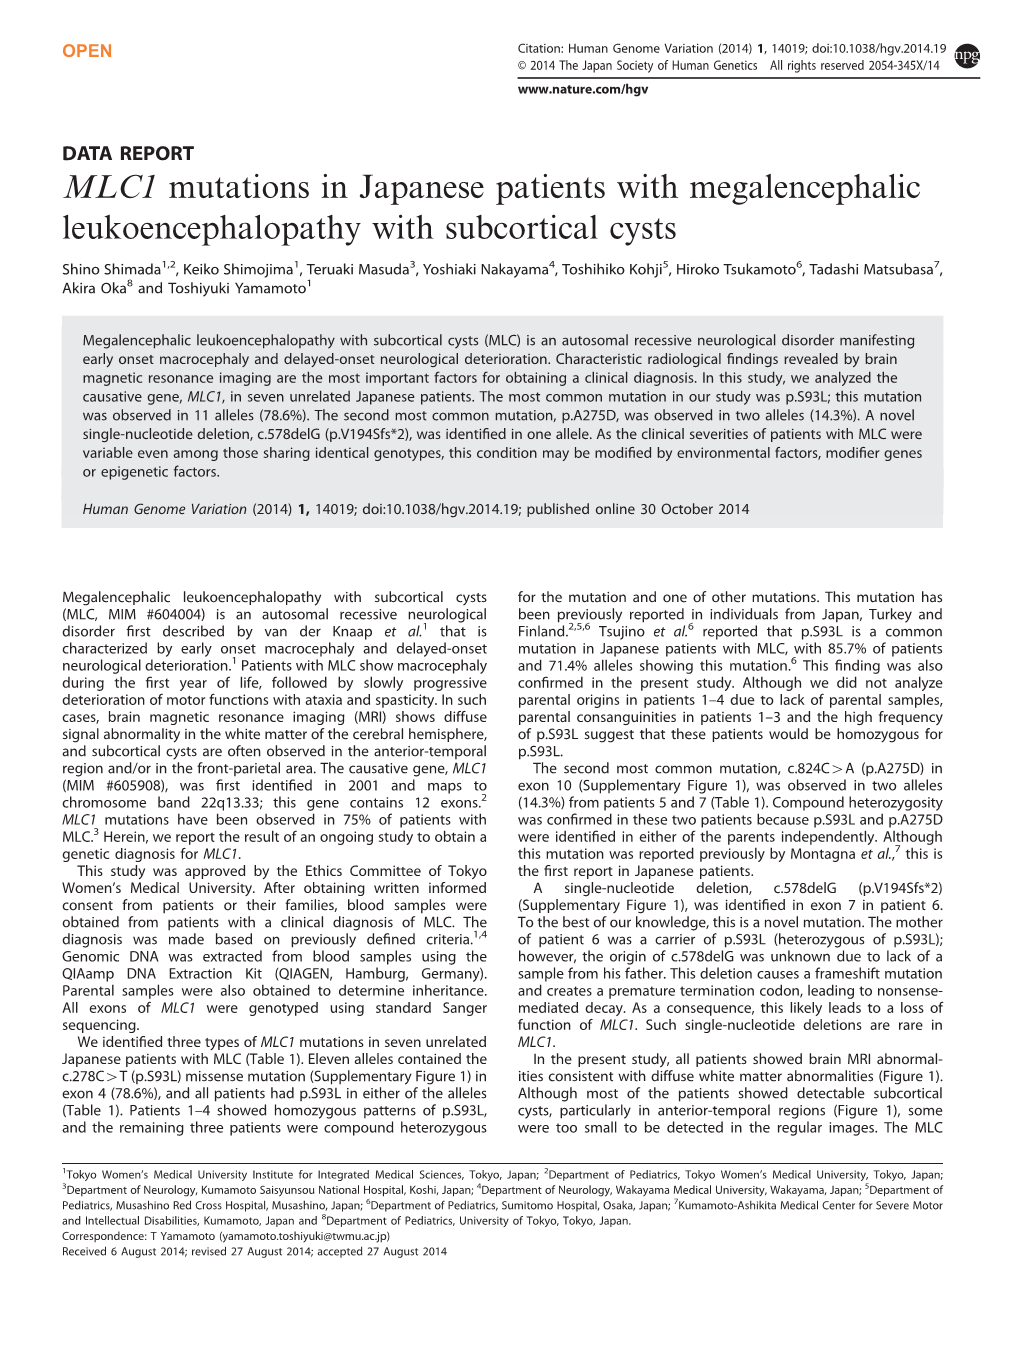 MLC1 Mutations in Japanese Patients with Megalencephalic Leukoencephalopathy with Subcortical Cysts